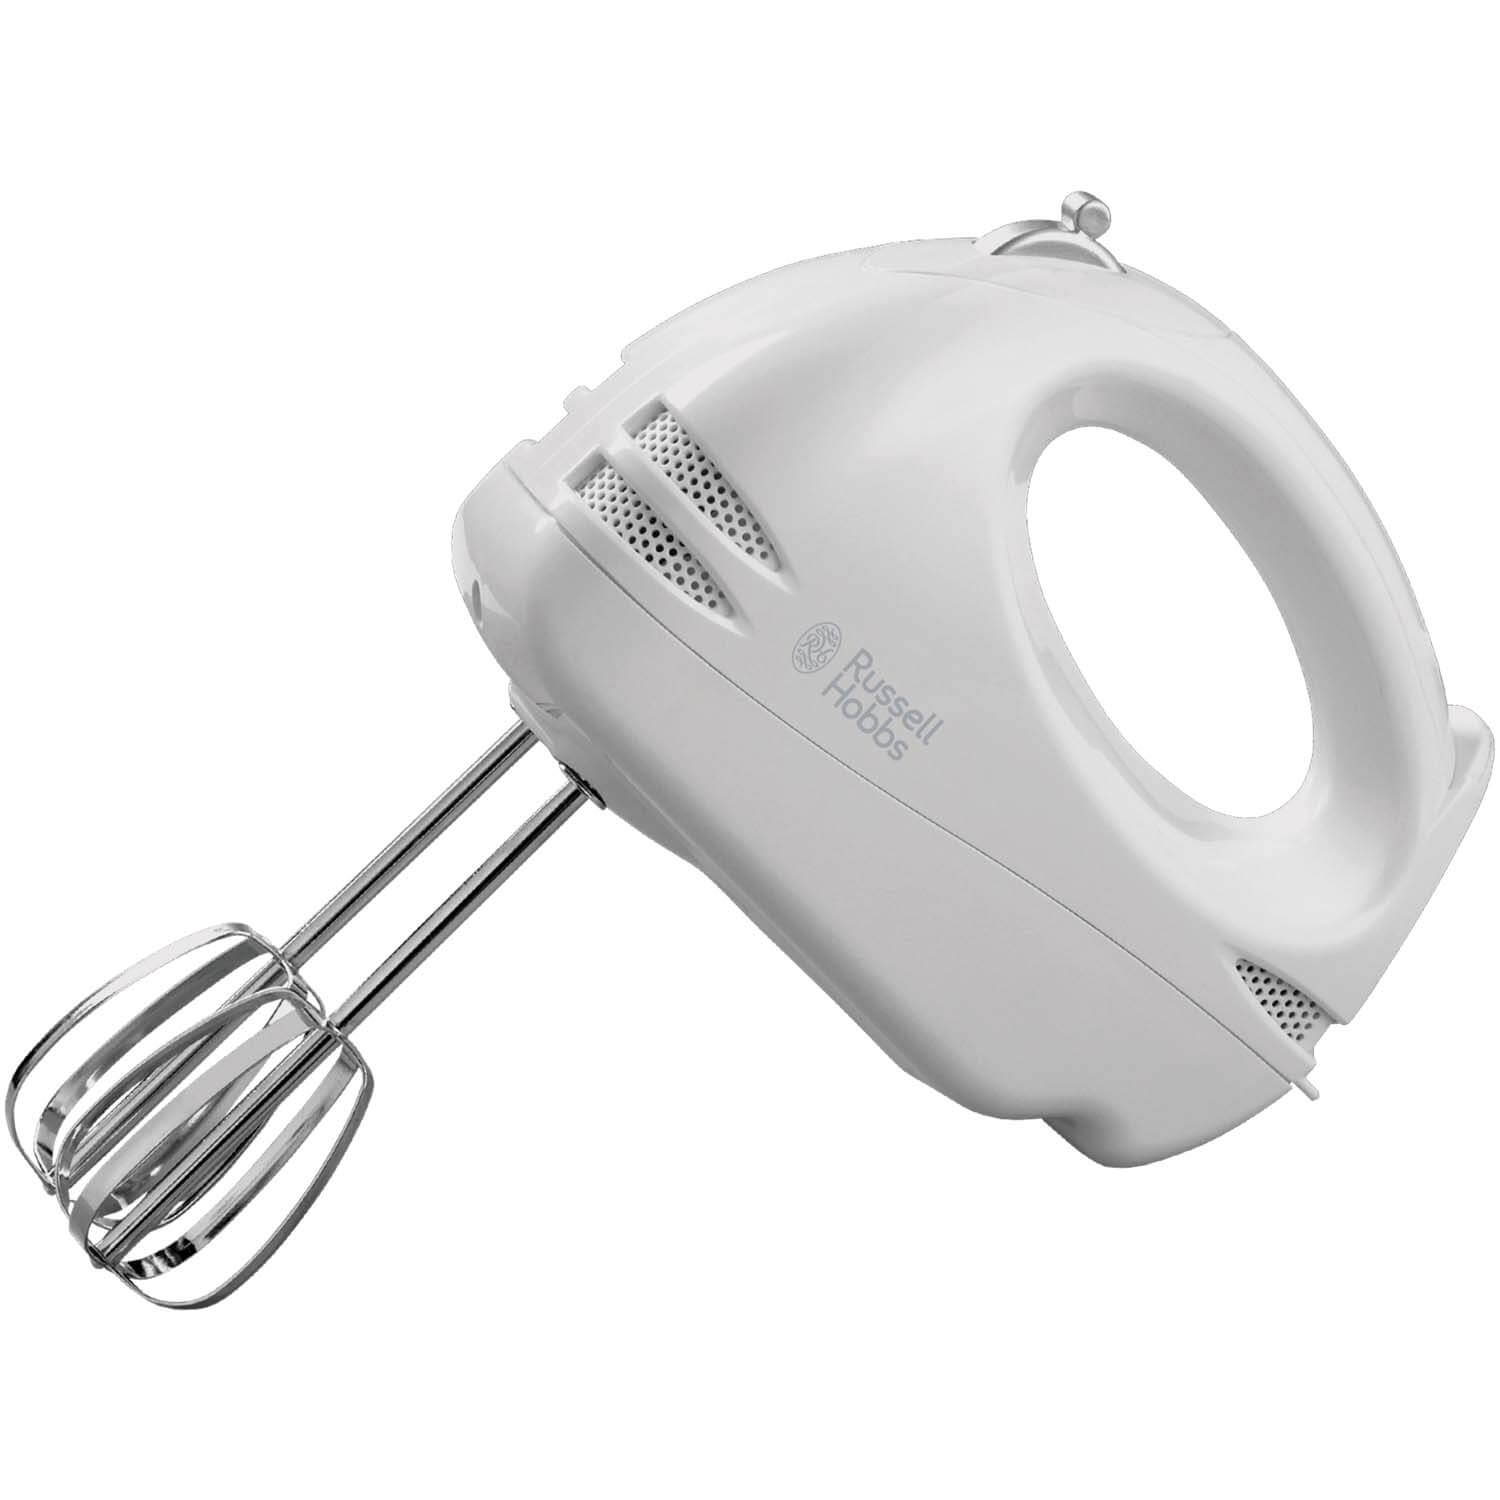 Russell Hobbs Hand Mixer - White | 14451 1 Shaws Department Stores